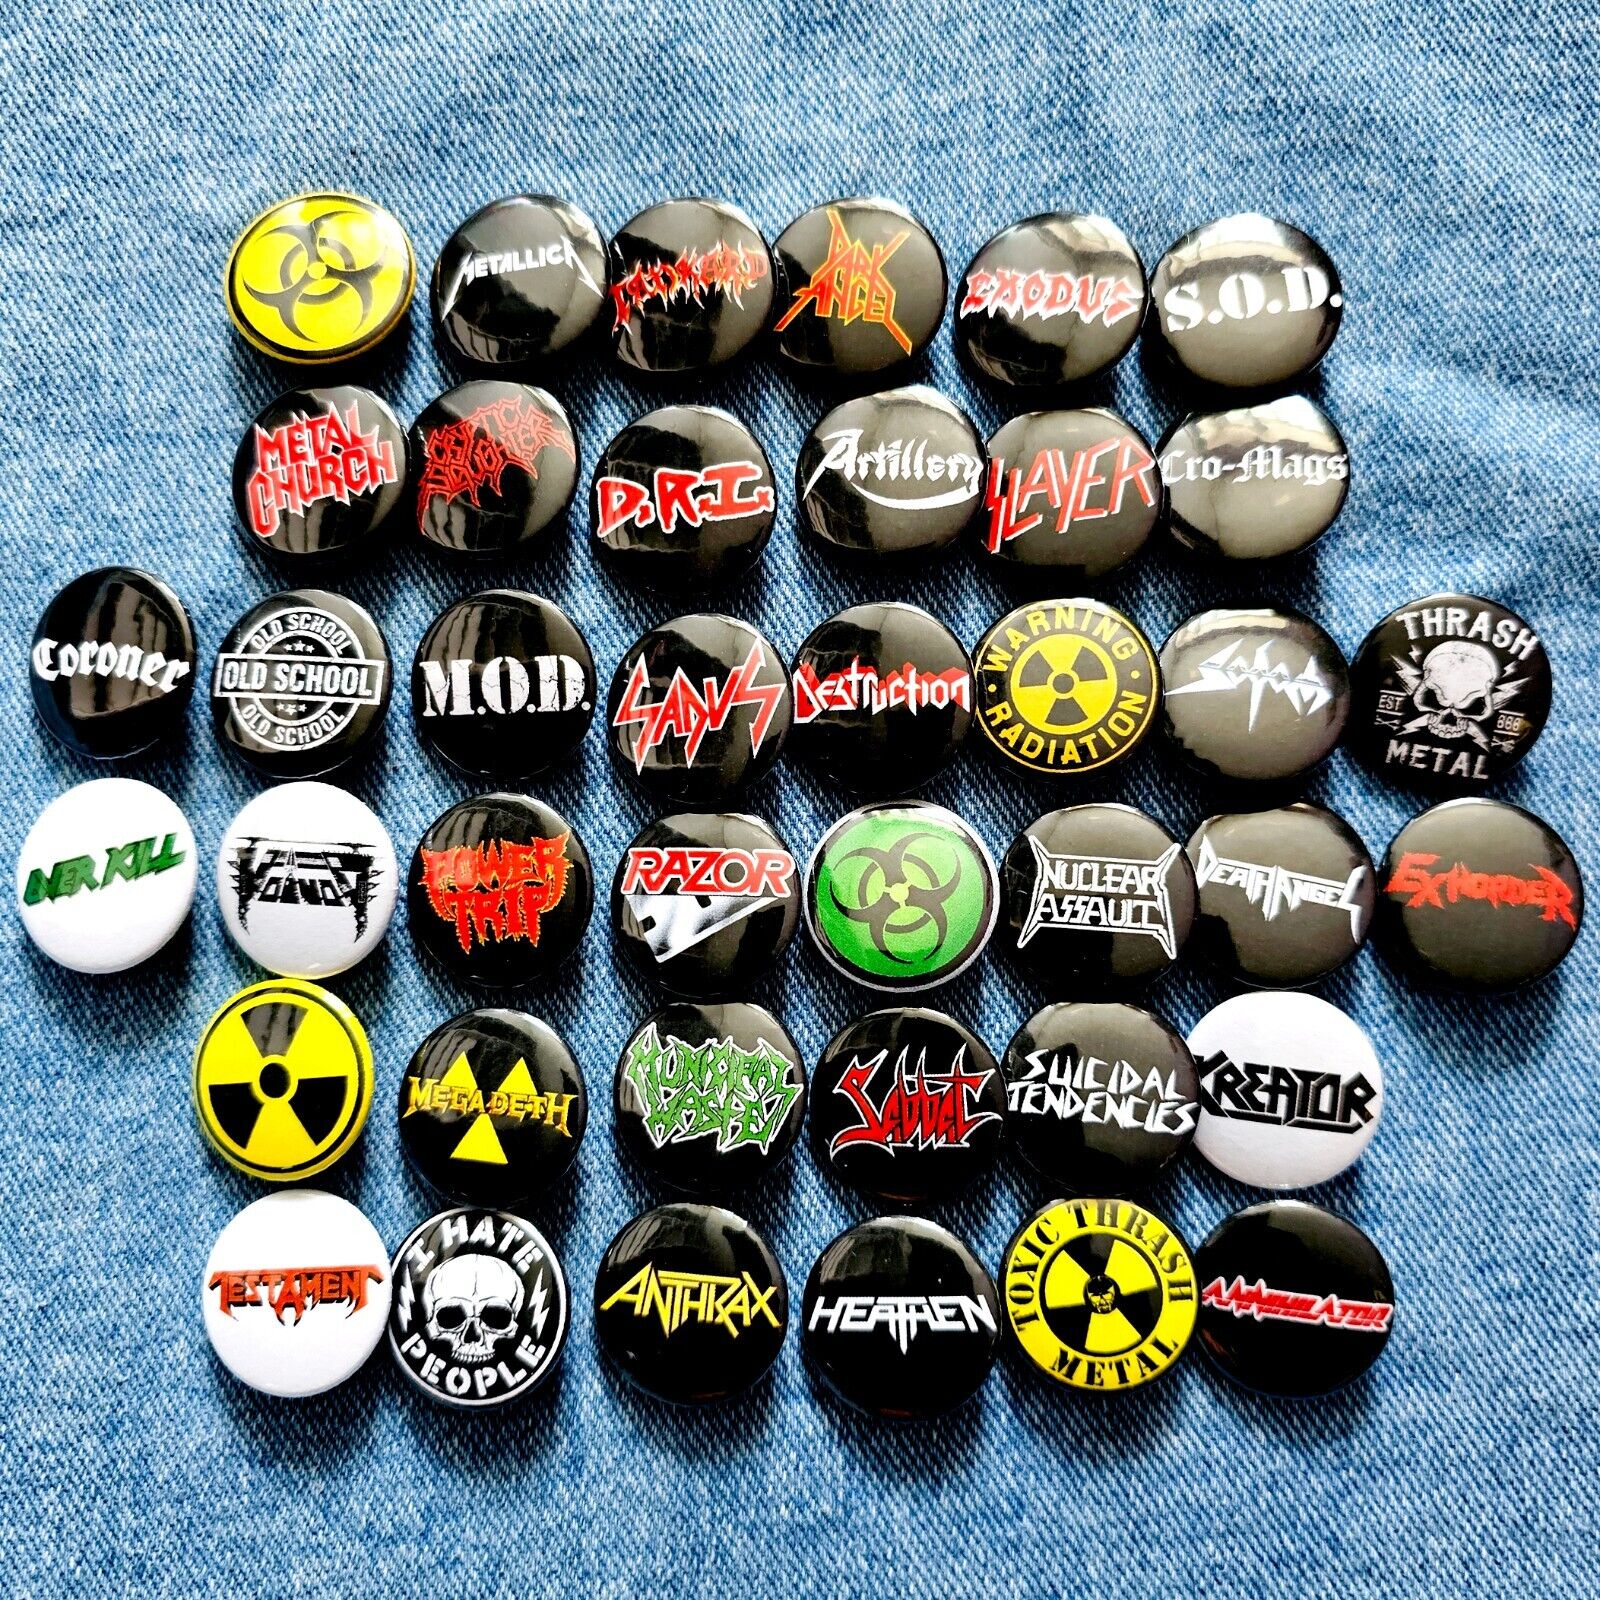 Thrash Metal button badge pins. Speed metal, Heavy Metal. 40 pins colection.